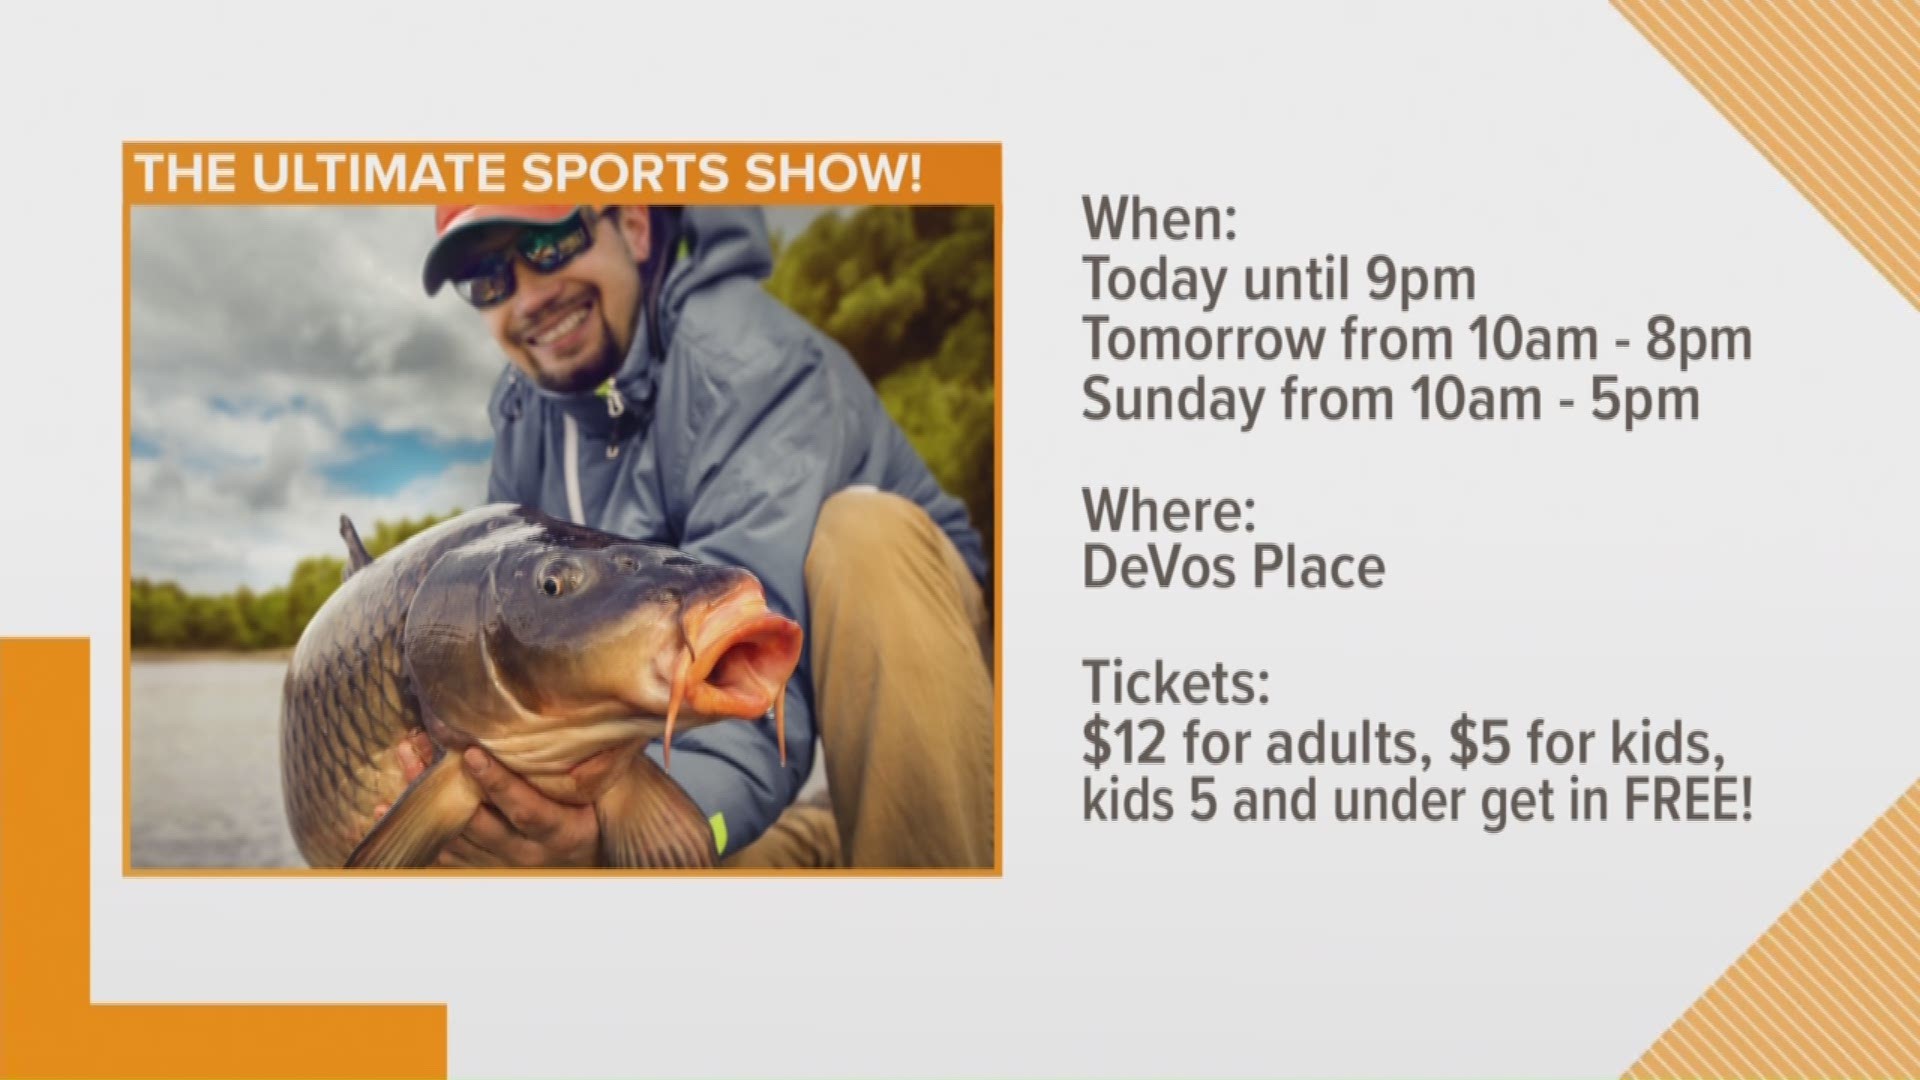 Ultimate Sports Show at Devos Place this weekend.